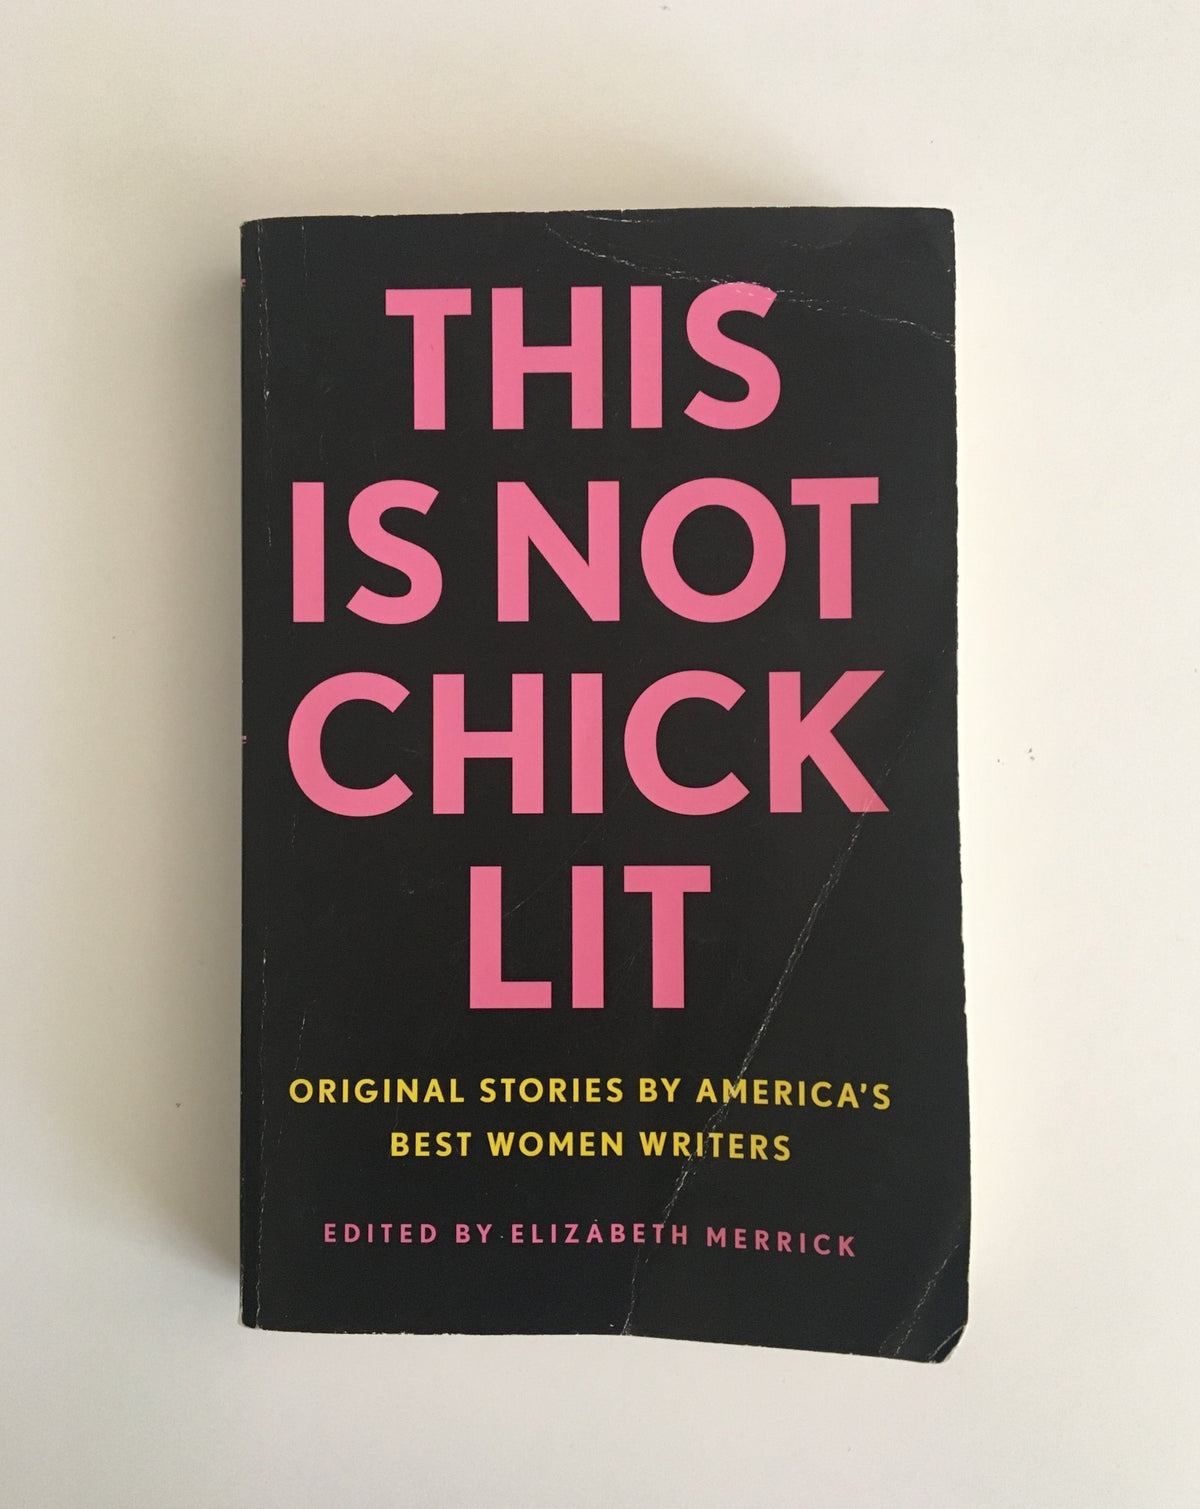 This is Not Chick Lit edited by Elizabeth Merrick